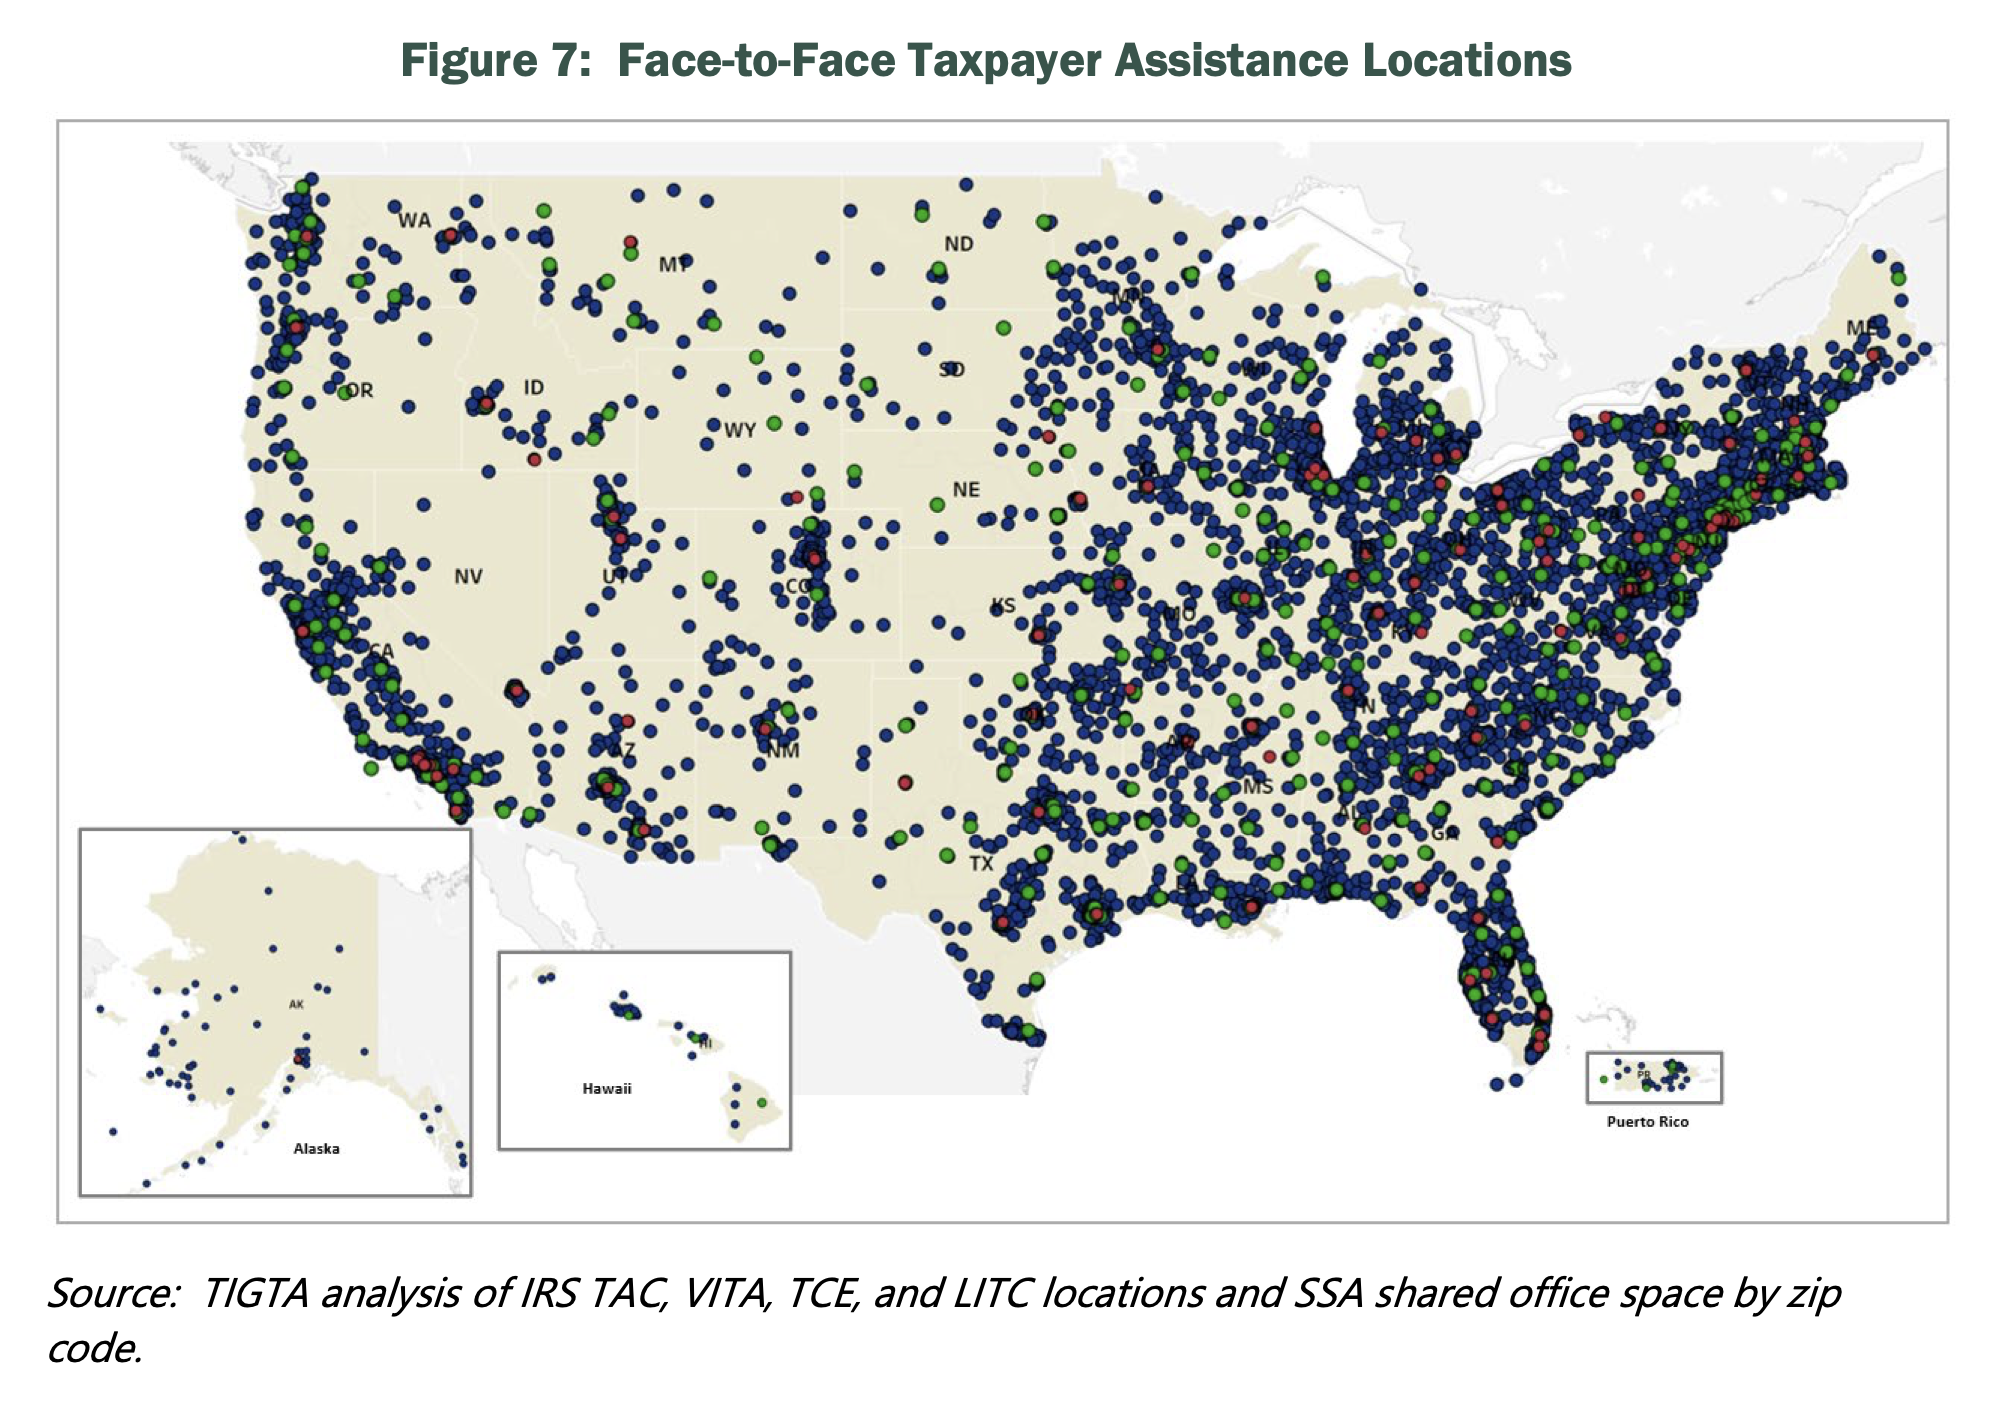 All current IRS locations that offer in-person services for taxpayers.